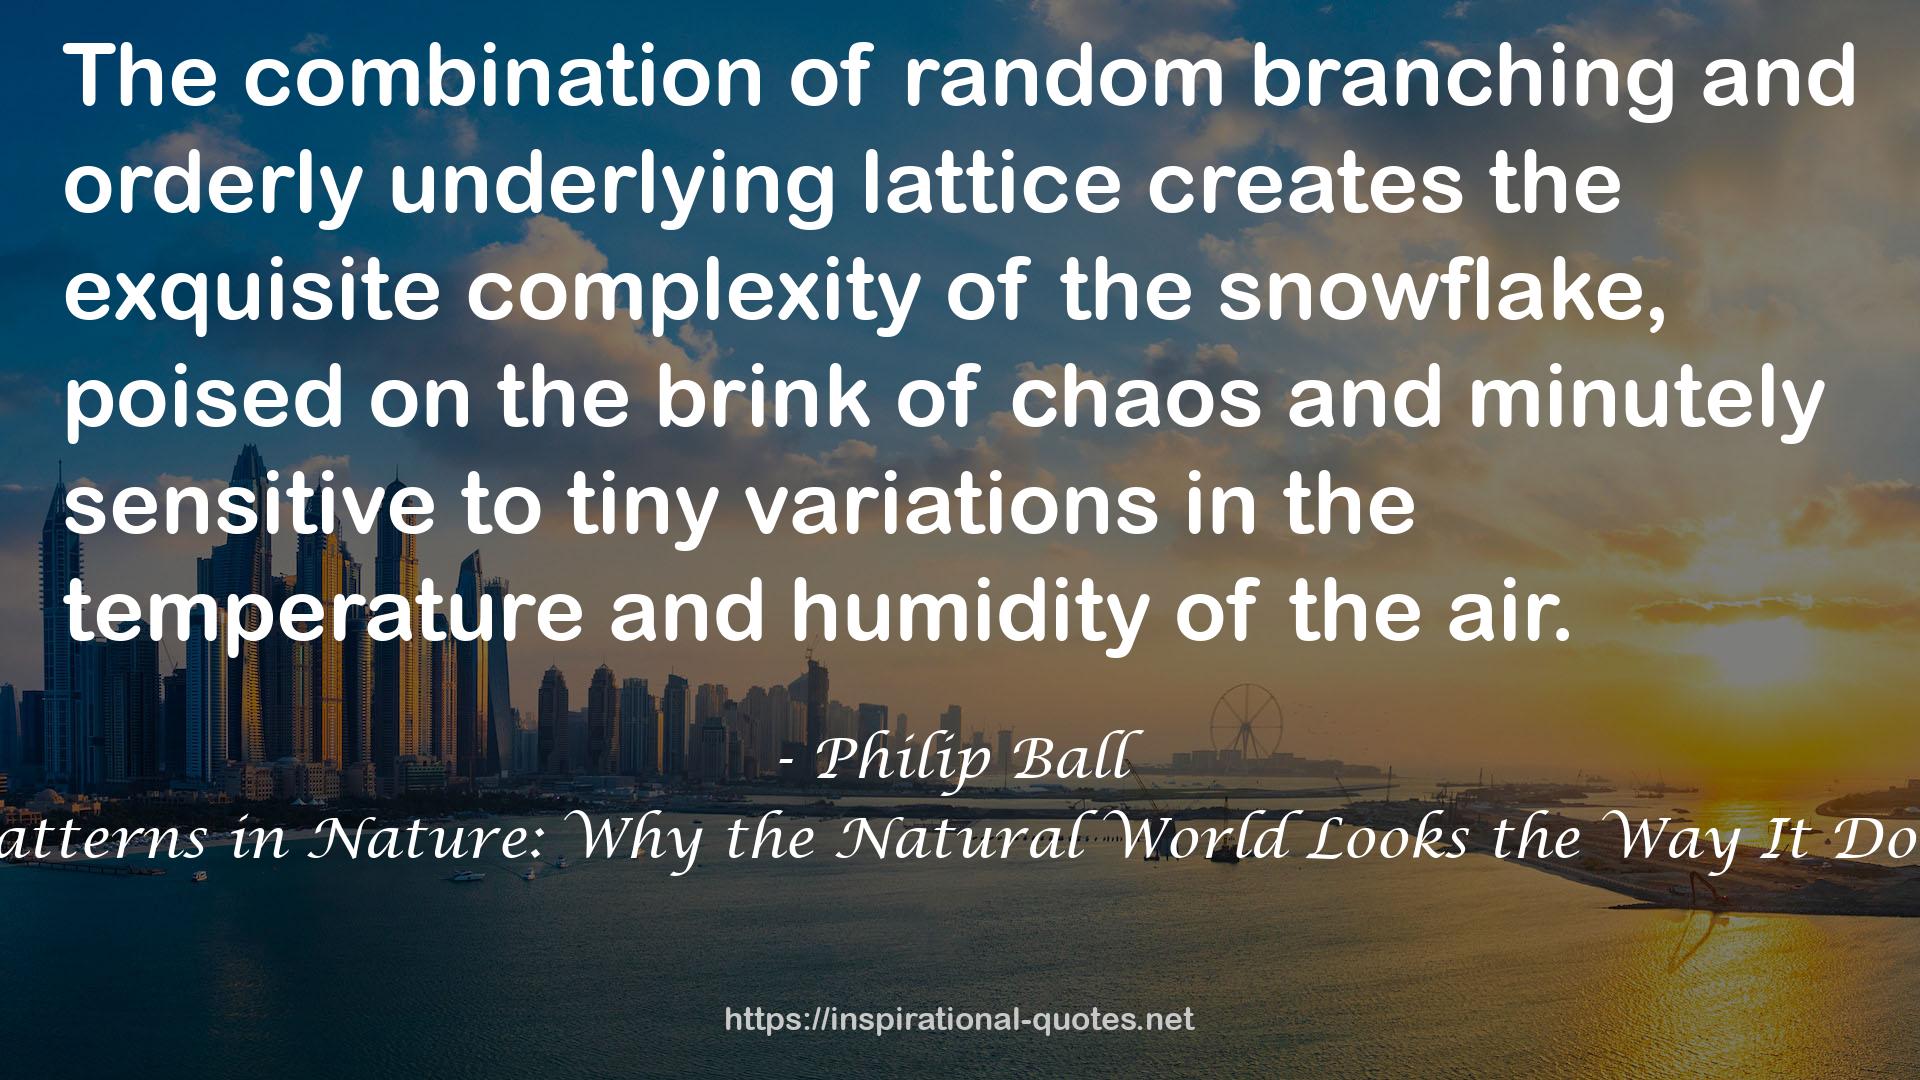 Patterns in Nature: Why the Natural World Looks the Way It Does QUOTES